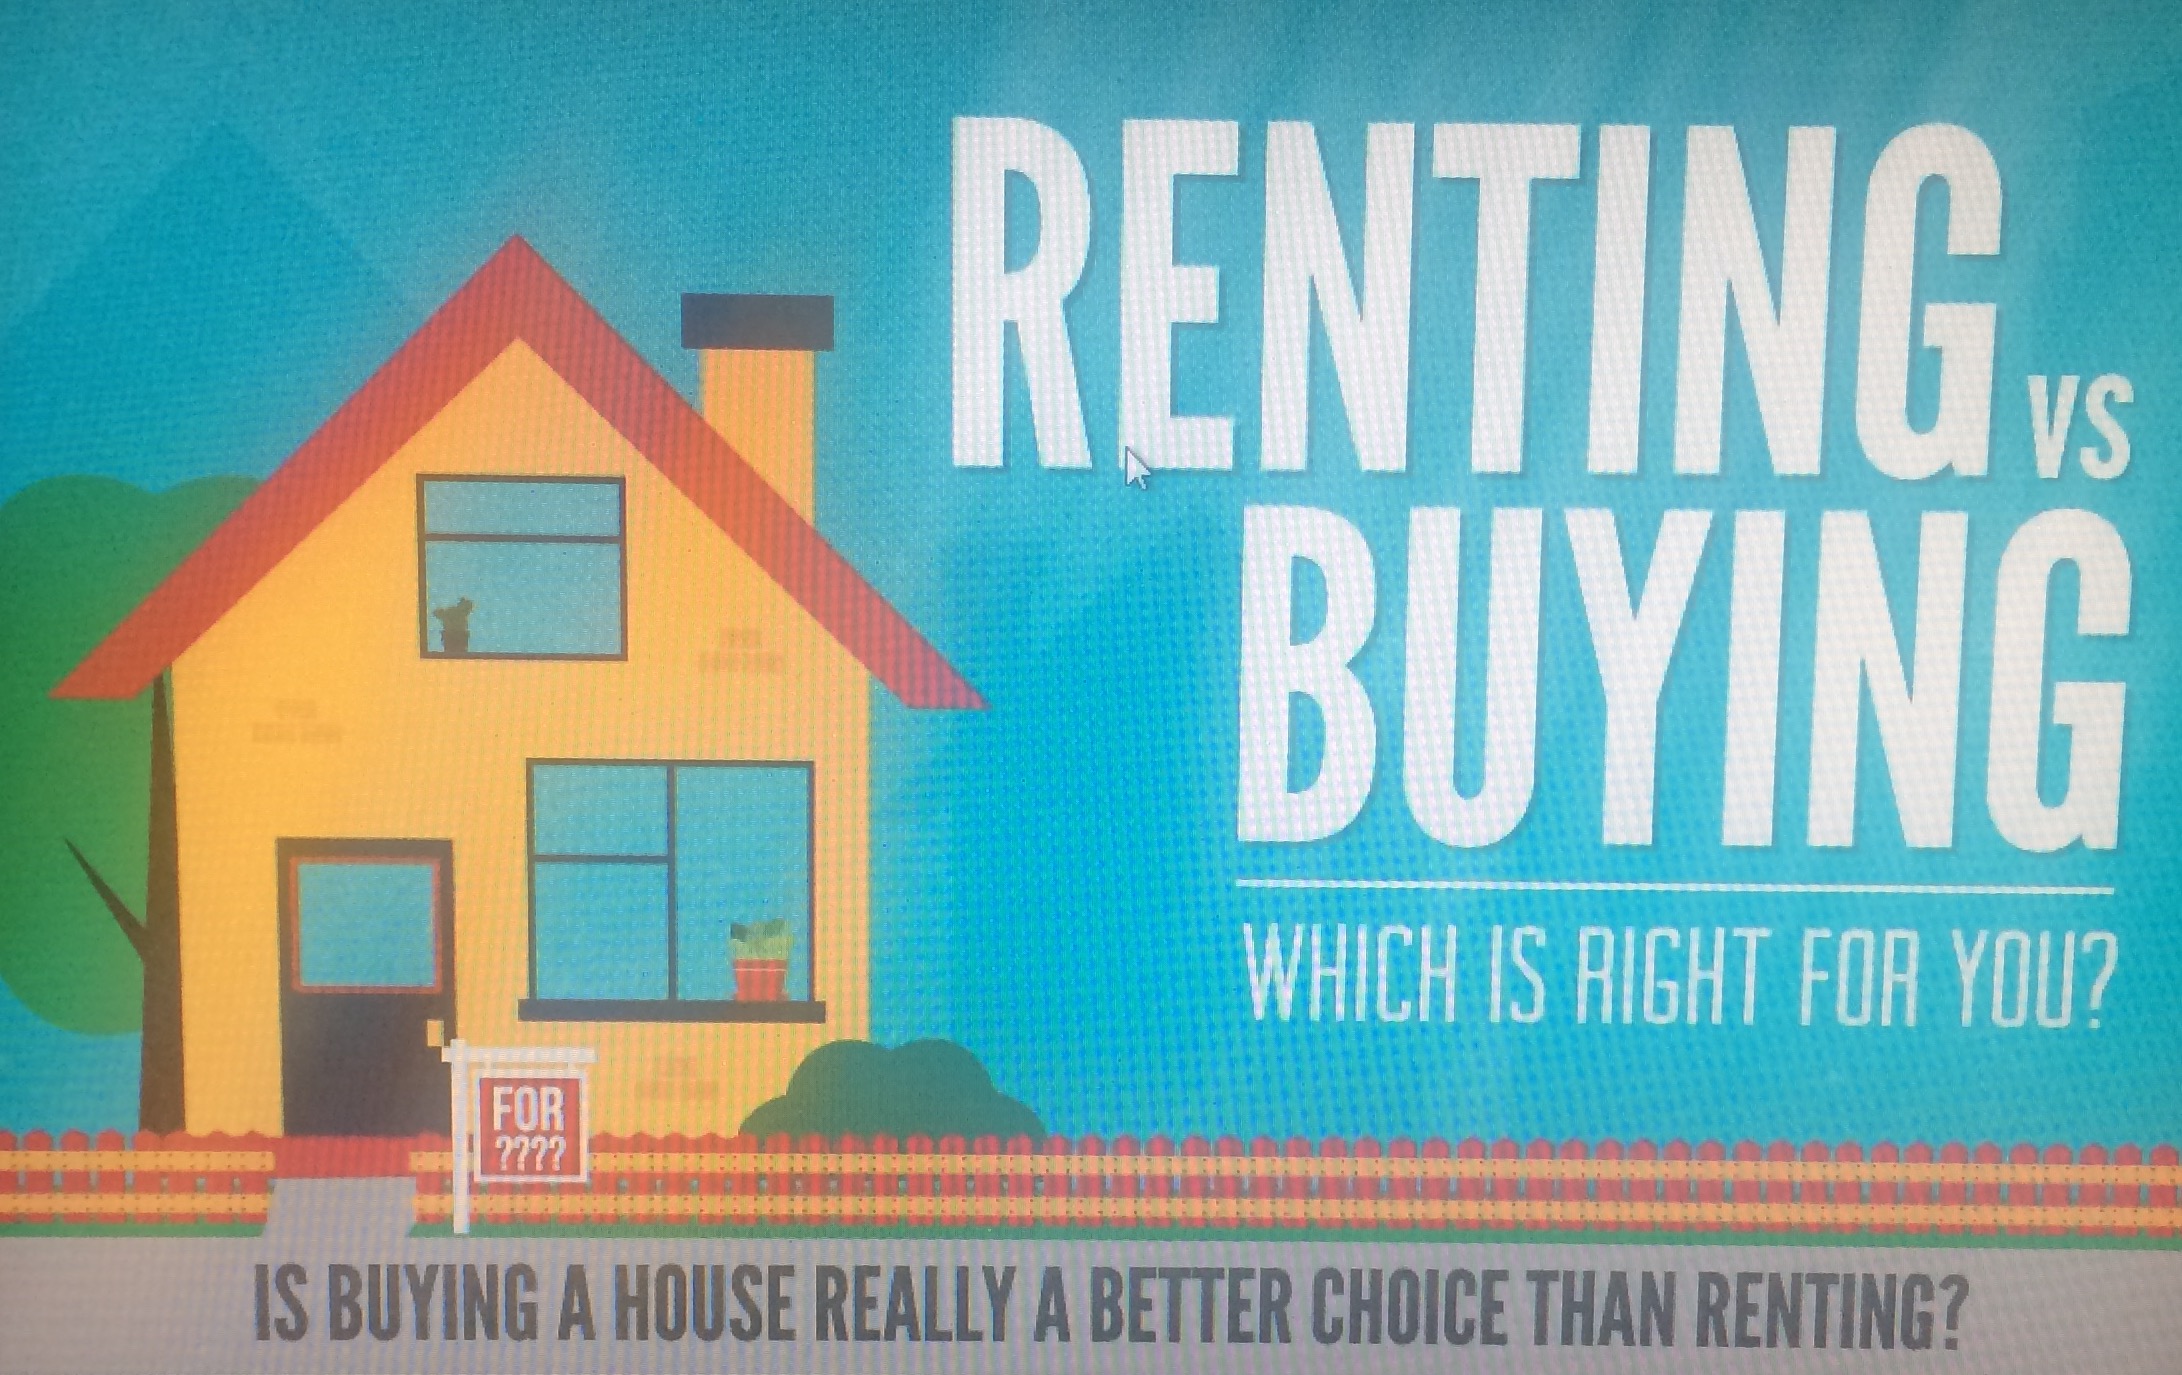 Is it better to Buy or Rent?